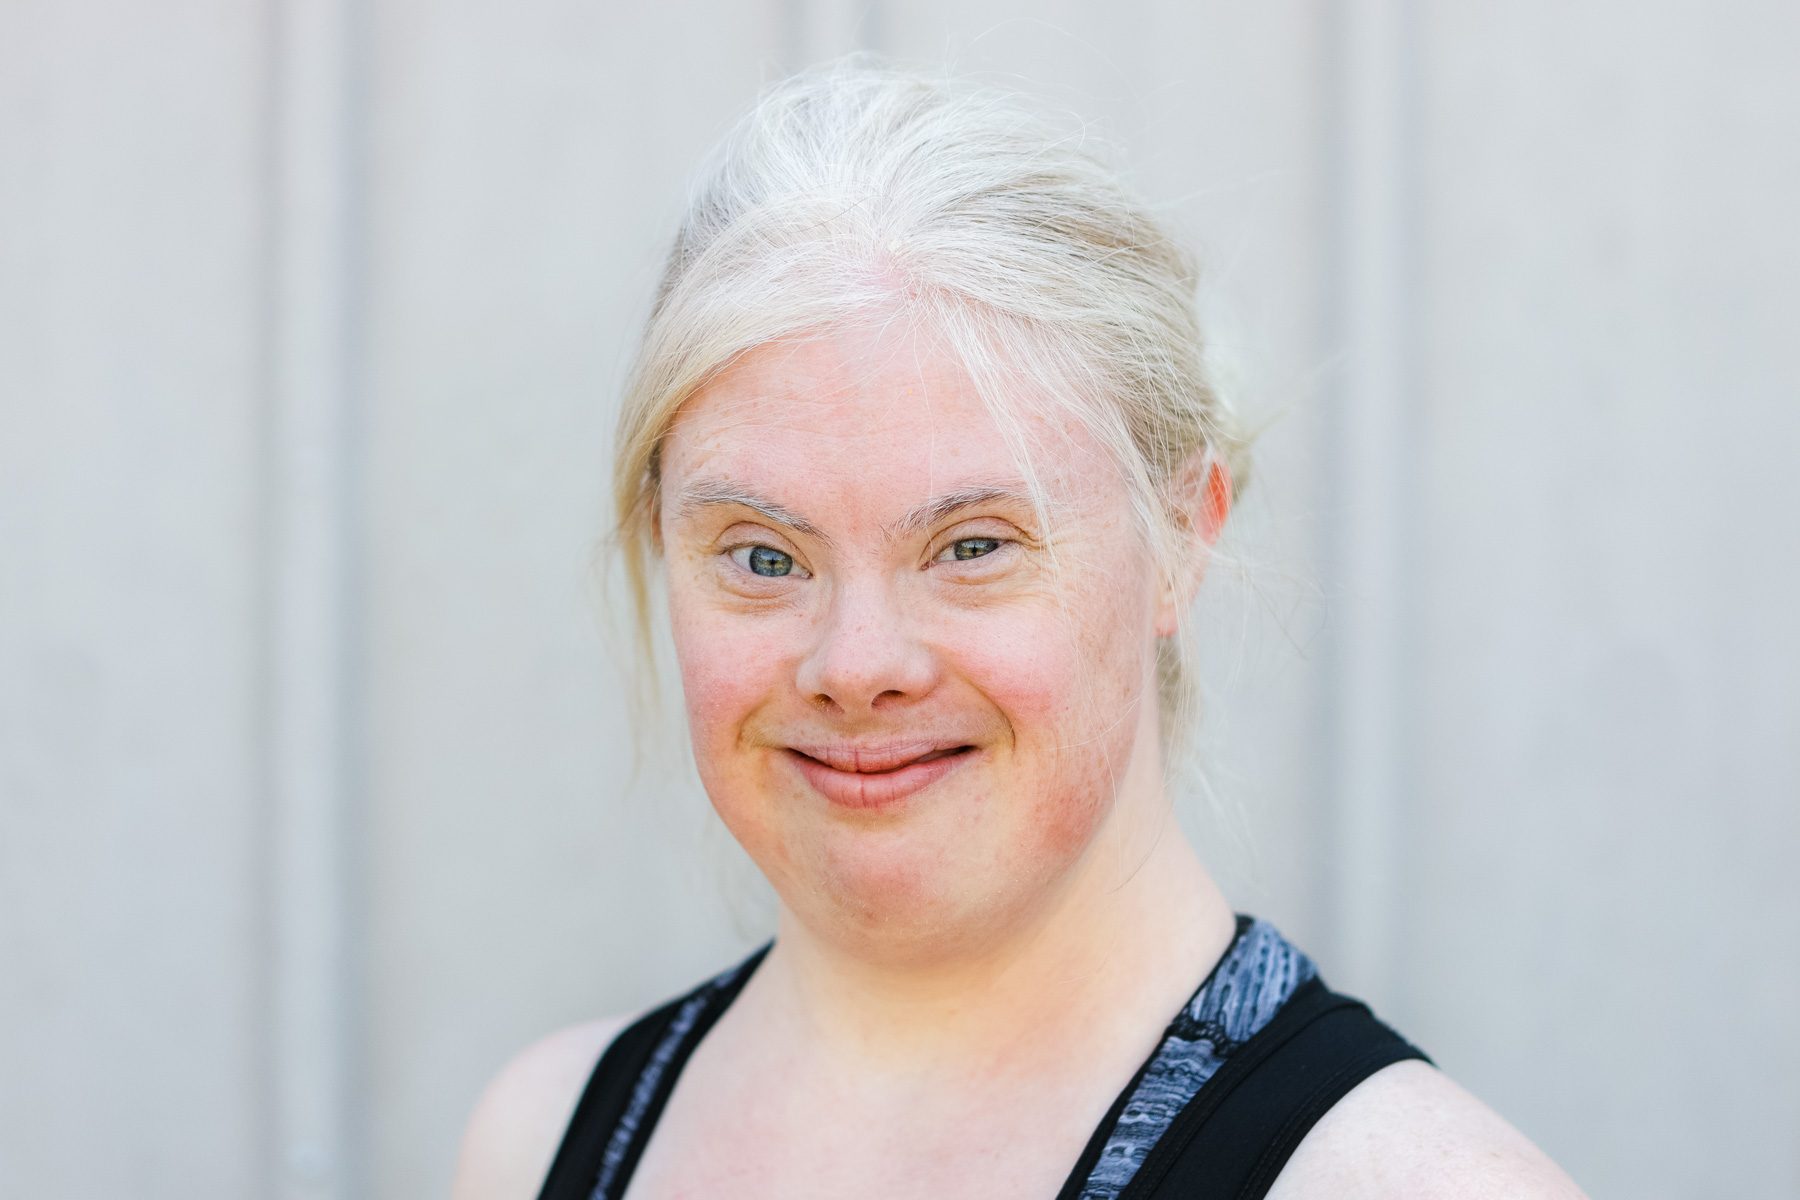 Helen poses for the camera. She is a young white woman with bleached blonde hair tied back. She has bright blue eyes and is wearing a sporty sleeveless top.